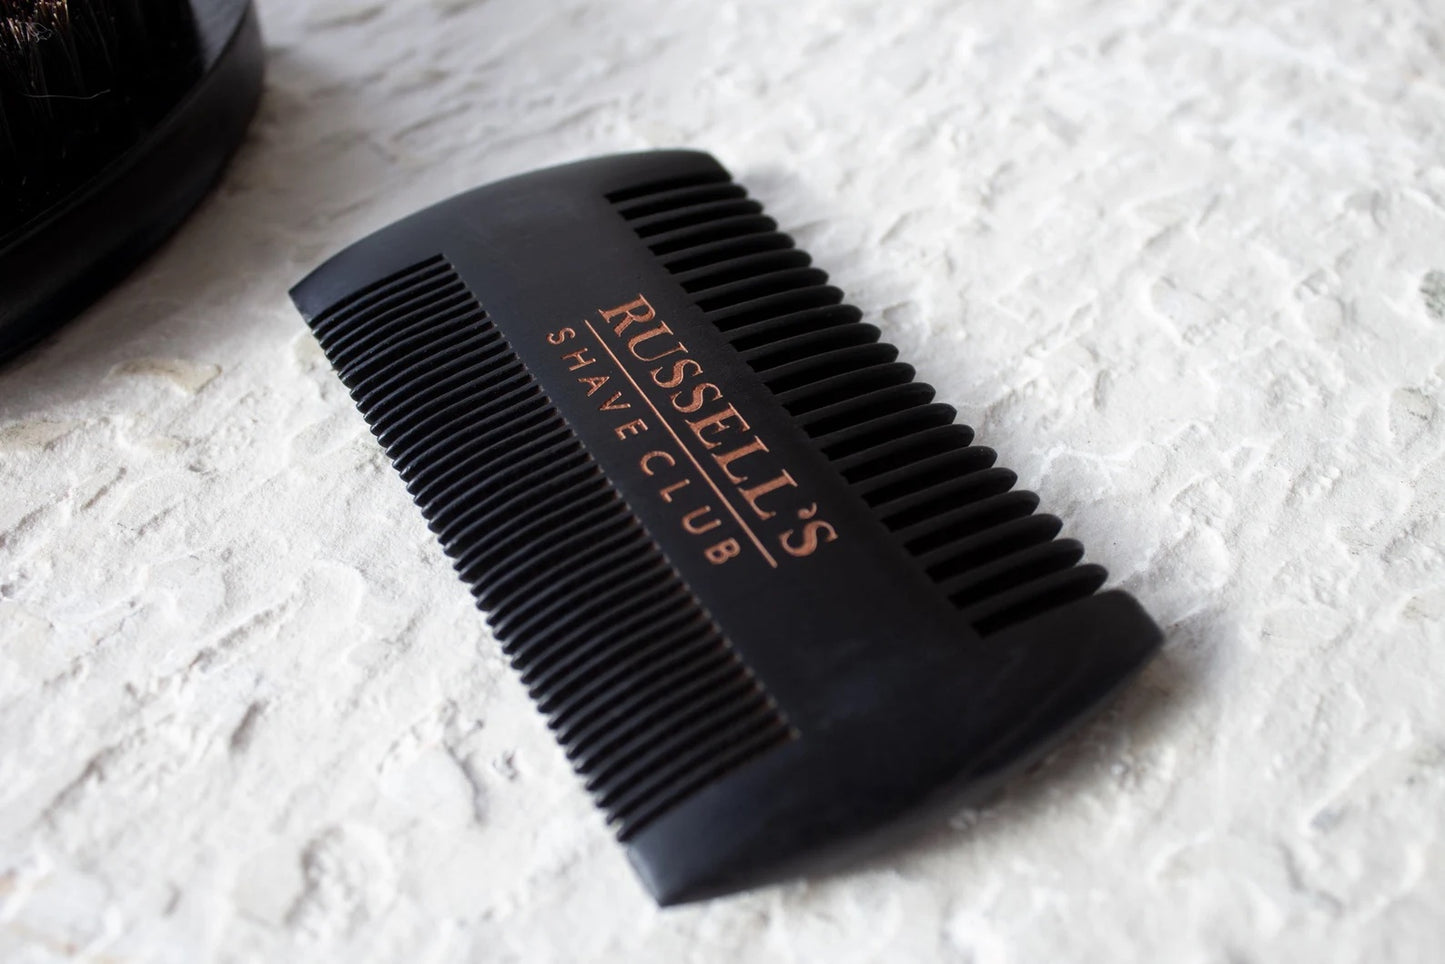 Russell's Deluxe Beard Care and Grooming Set